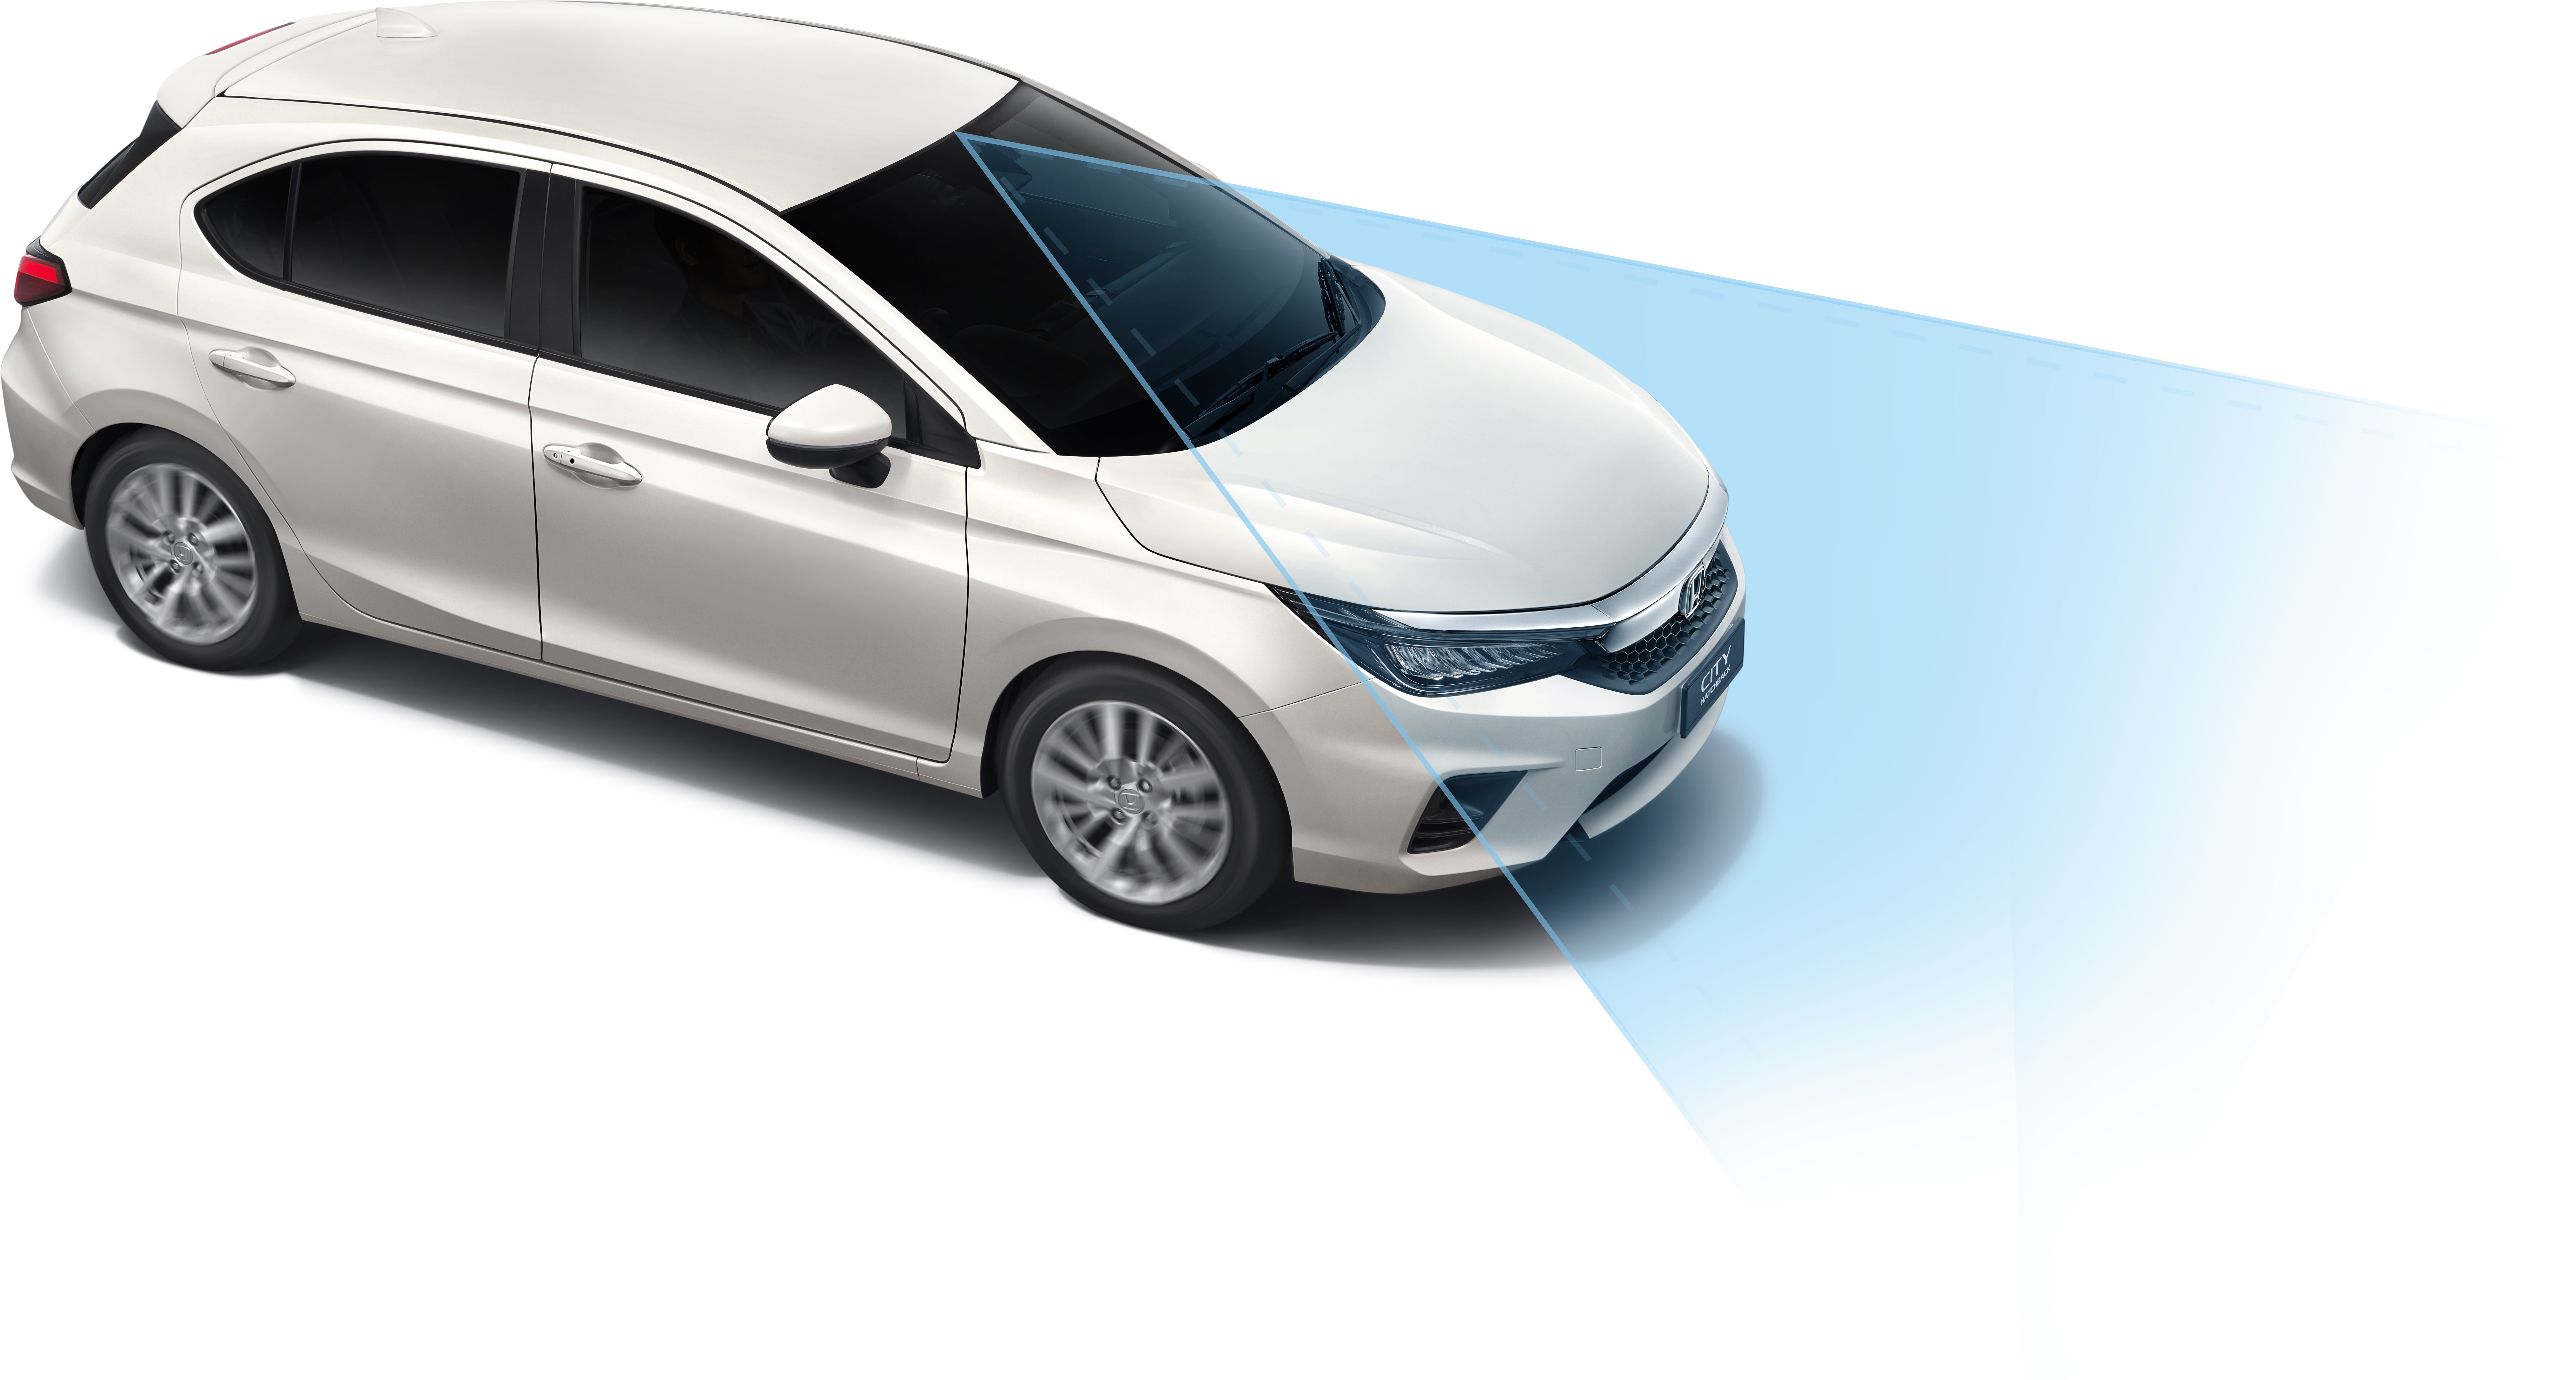 Honda Malaysia Introduces New Variant To The All-New City Hatchback, The V-SENSING - thumbnail